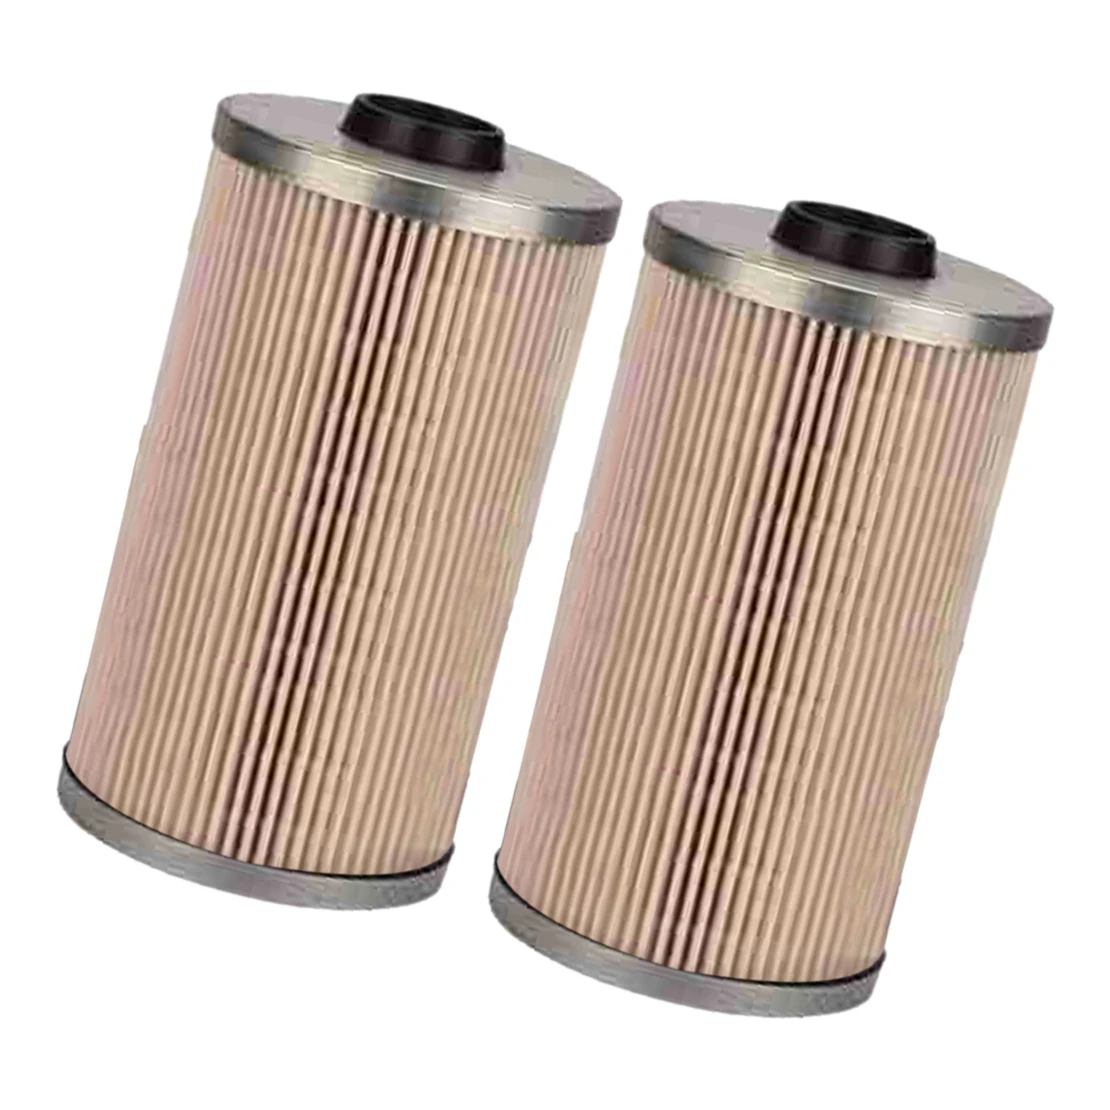 

FS19763 PF7930 P550851 2Pcs Fuel Oil Water Separator Filters FS19765 Fit for DAVCO 102528 FH23435 FH23447 FH23448 FH23453